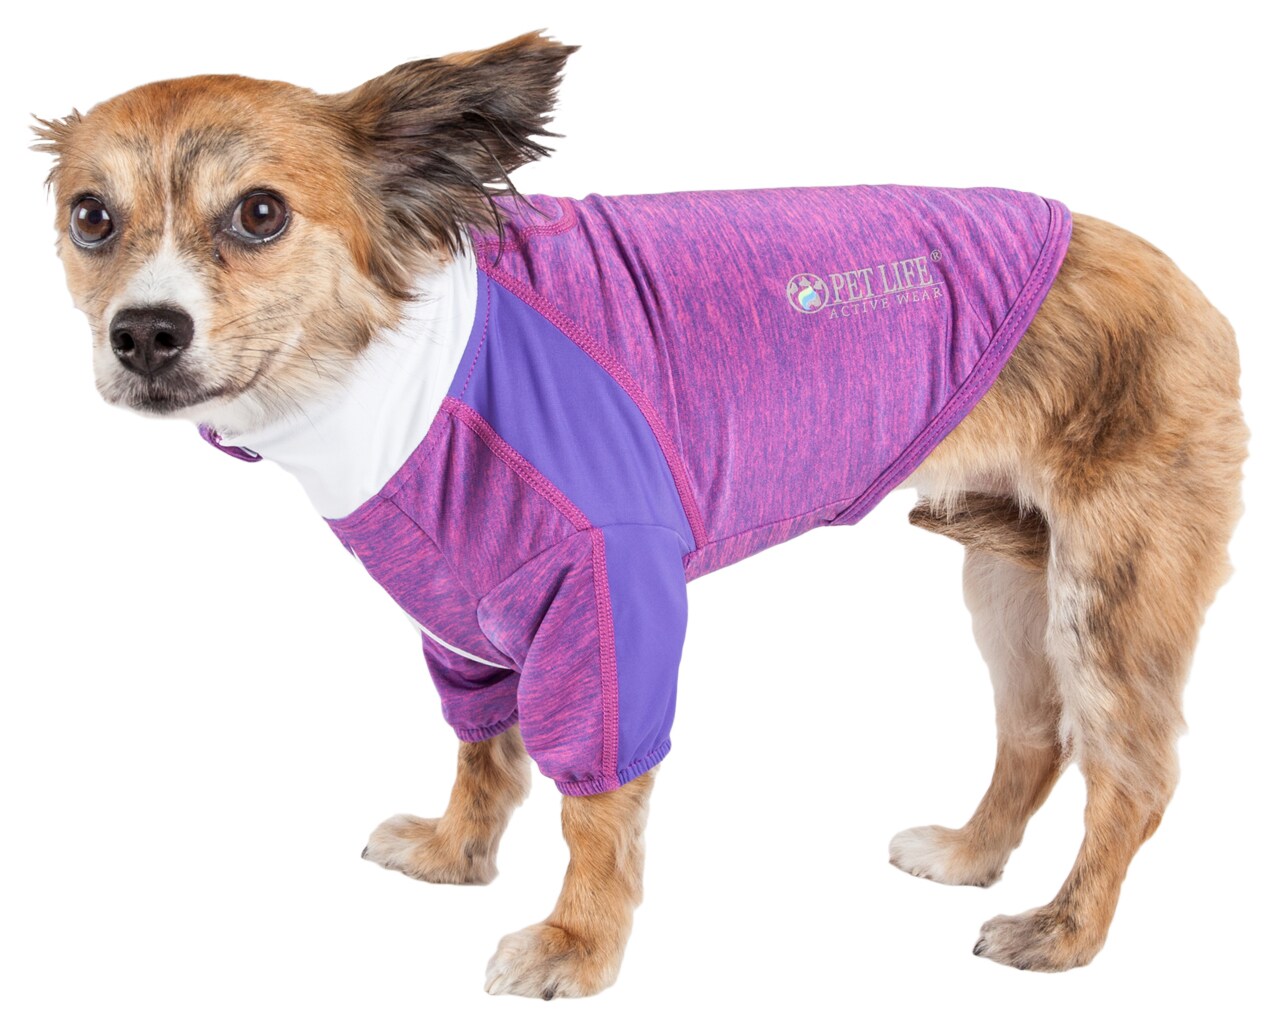 Pet Life Active 'Warf Speed' Heathered Ultra-Stretch Sporty Performance Dog T-Shirt (Blue - X-Small)